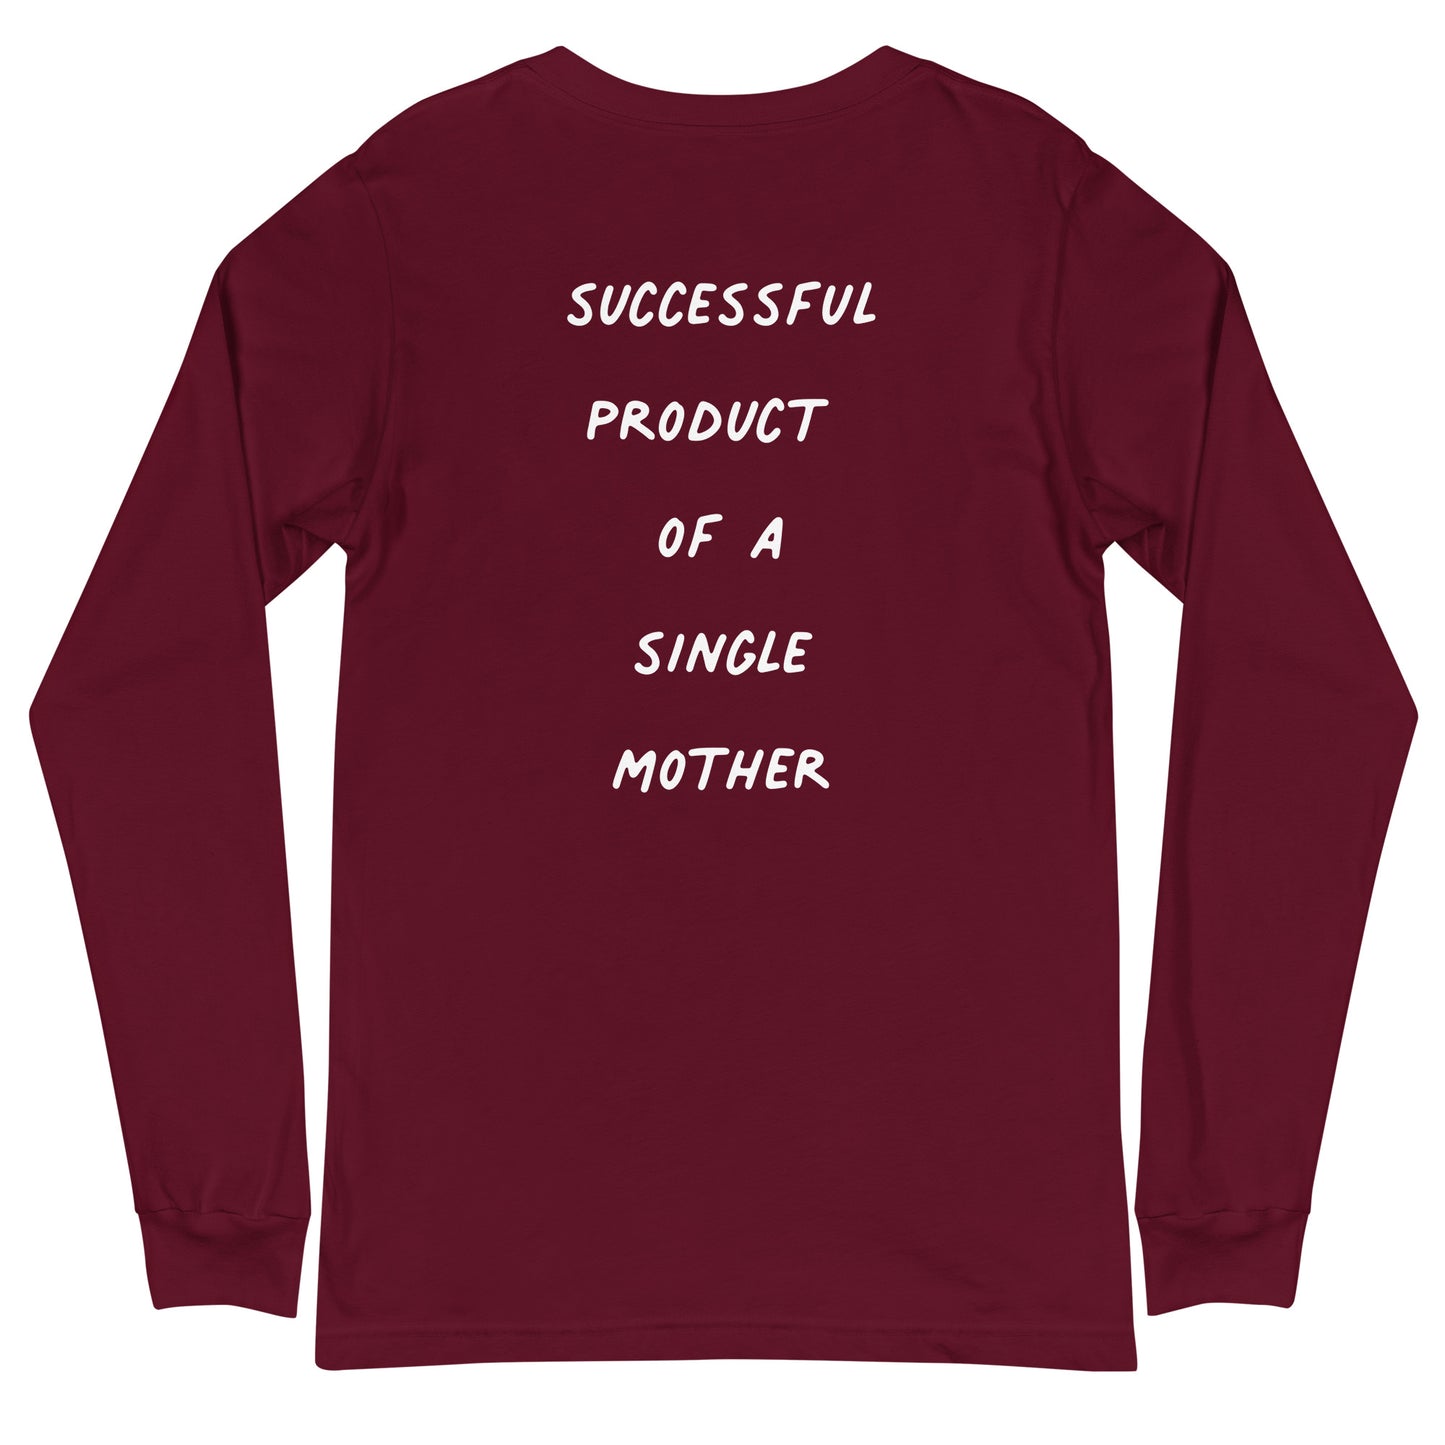 Successful Product Of A Single Mother Unisex Long Sleeve Shirt